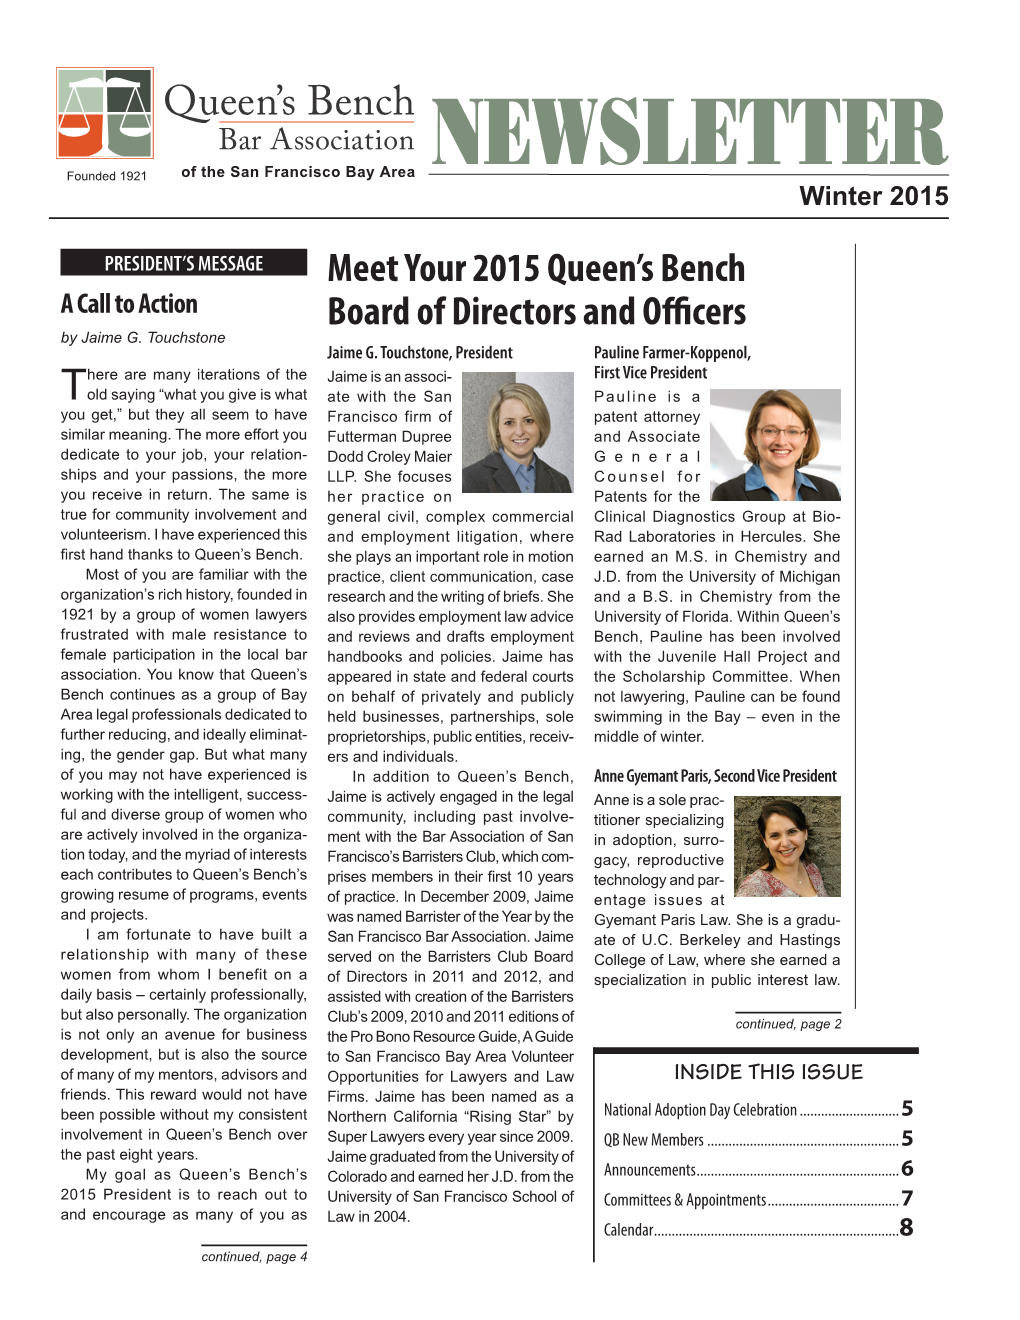 Meet Your 2015 Queen's Bench Board of Directors and Officers